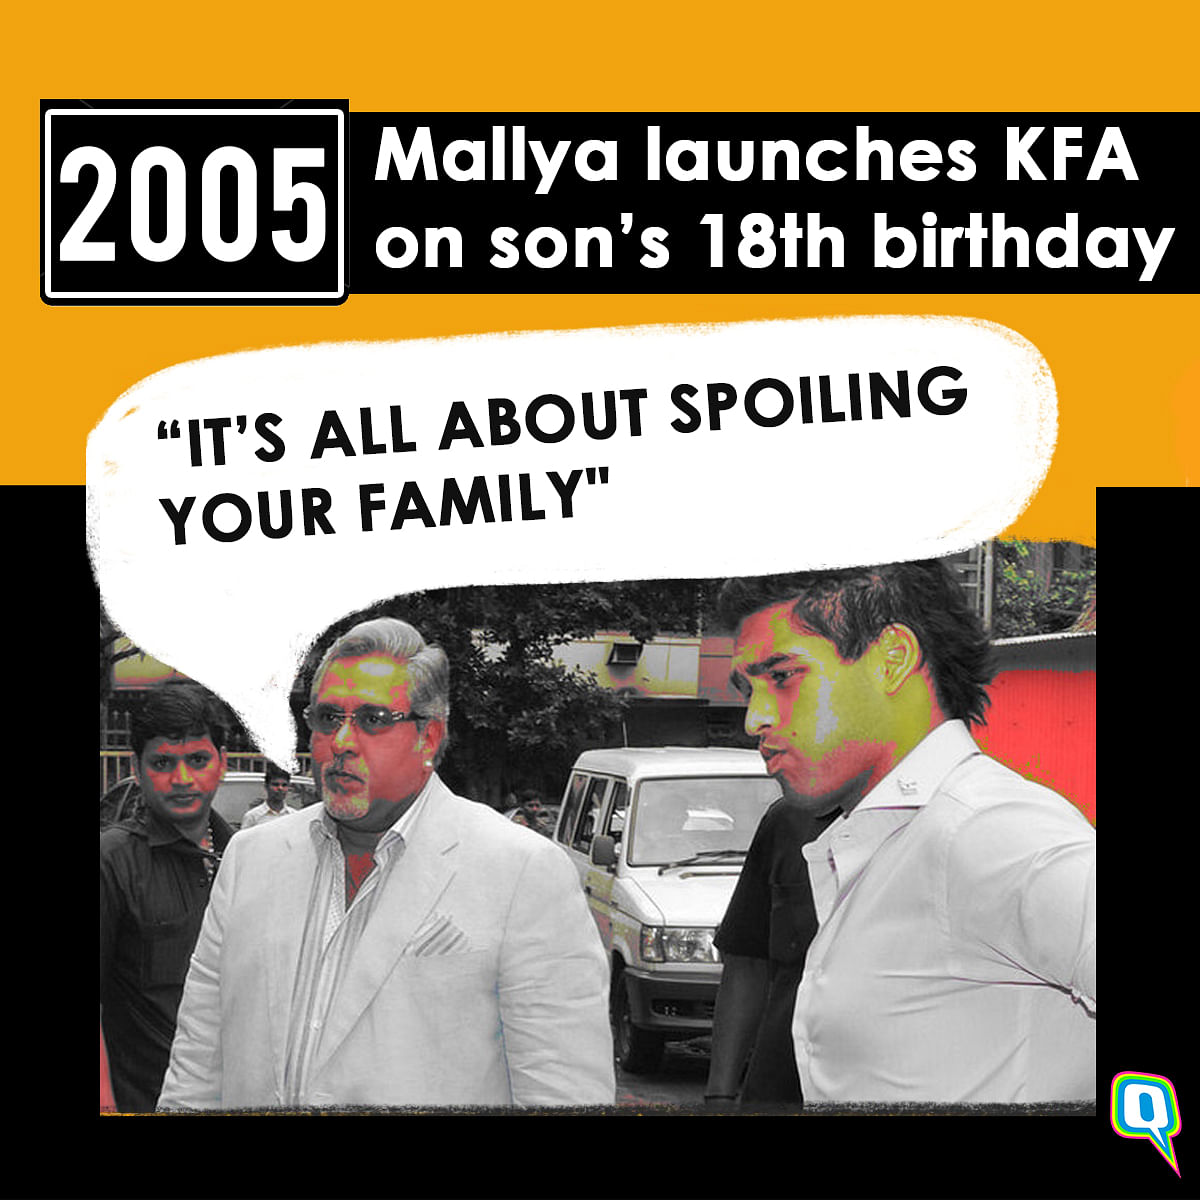 While India awaits his return, here’s a timeline of how Mallya’s good times came to an end.